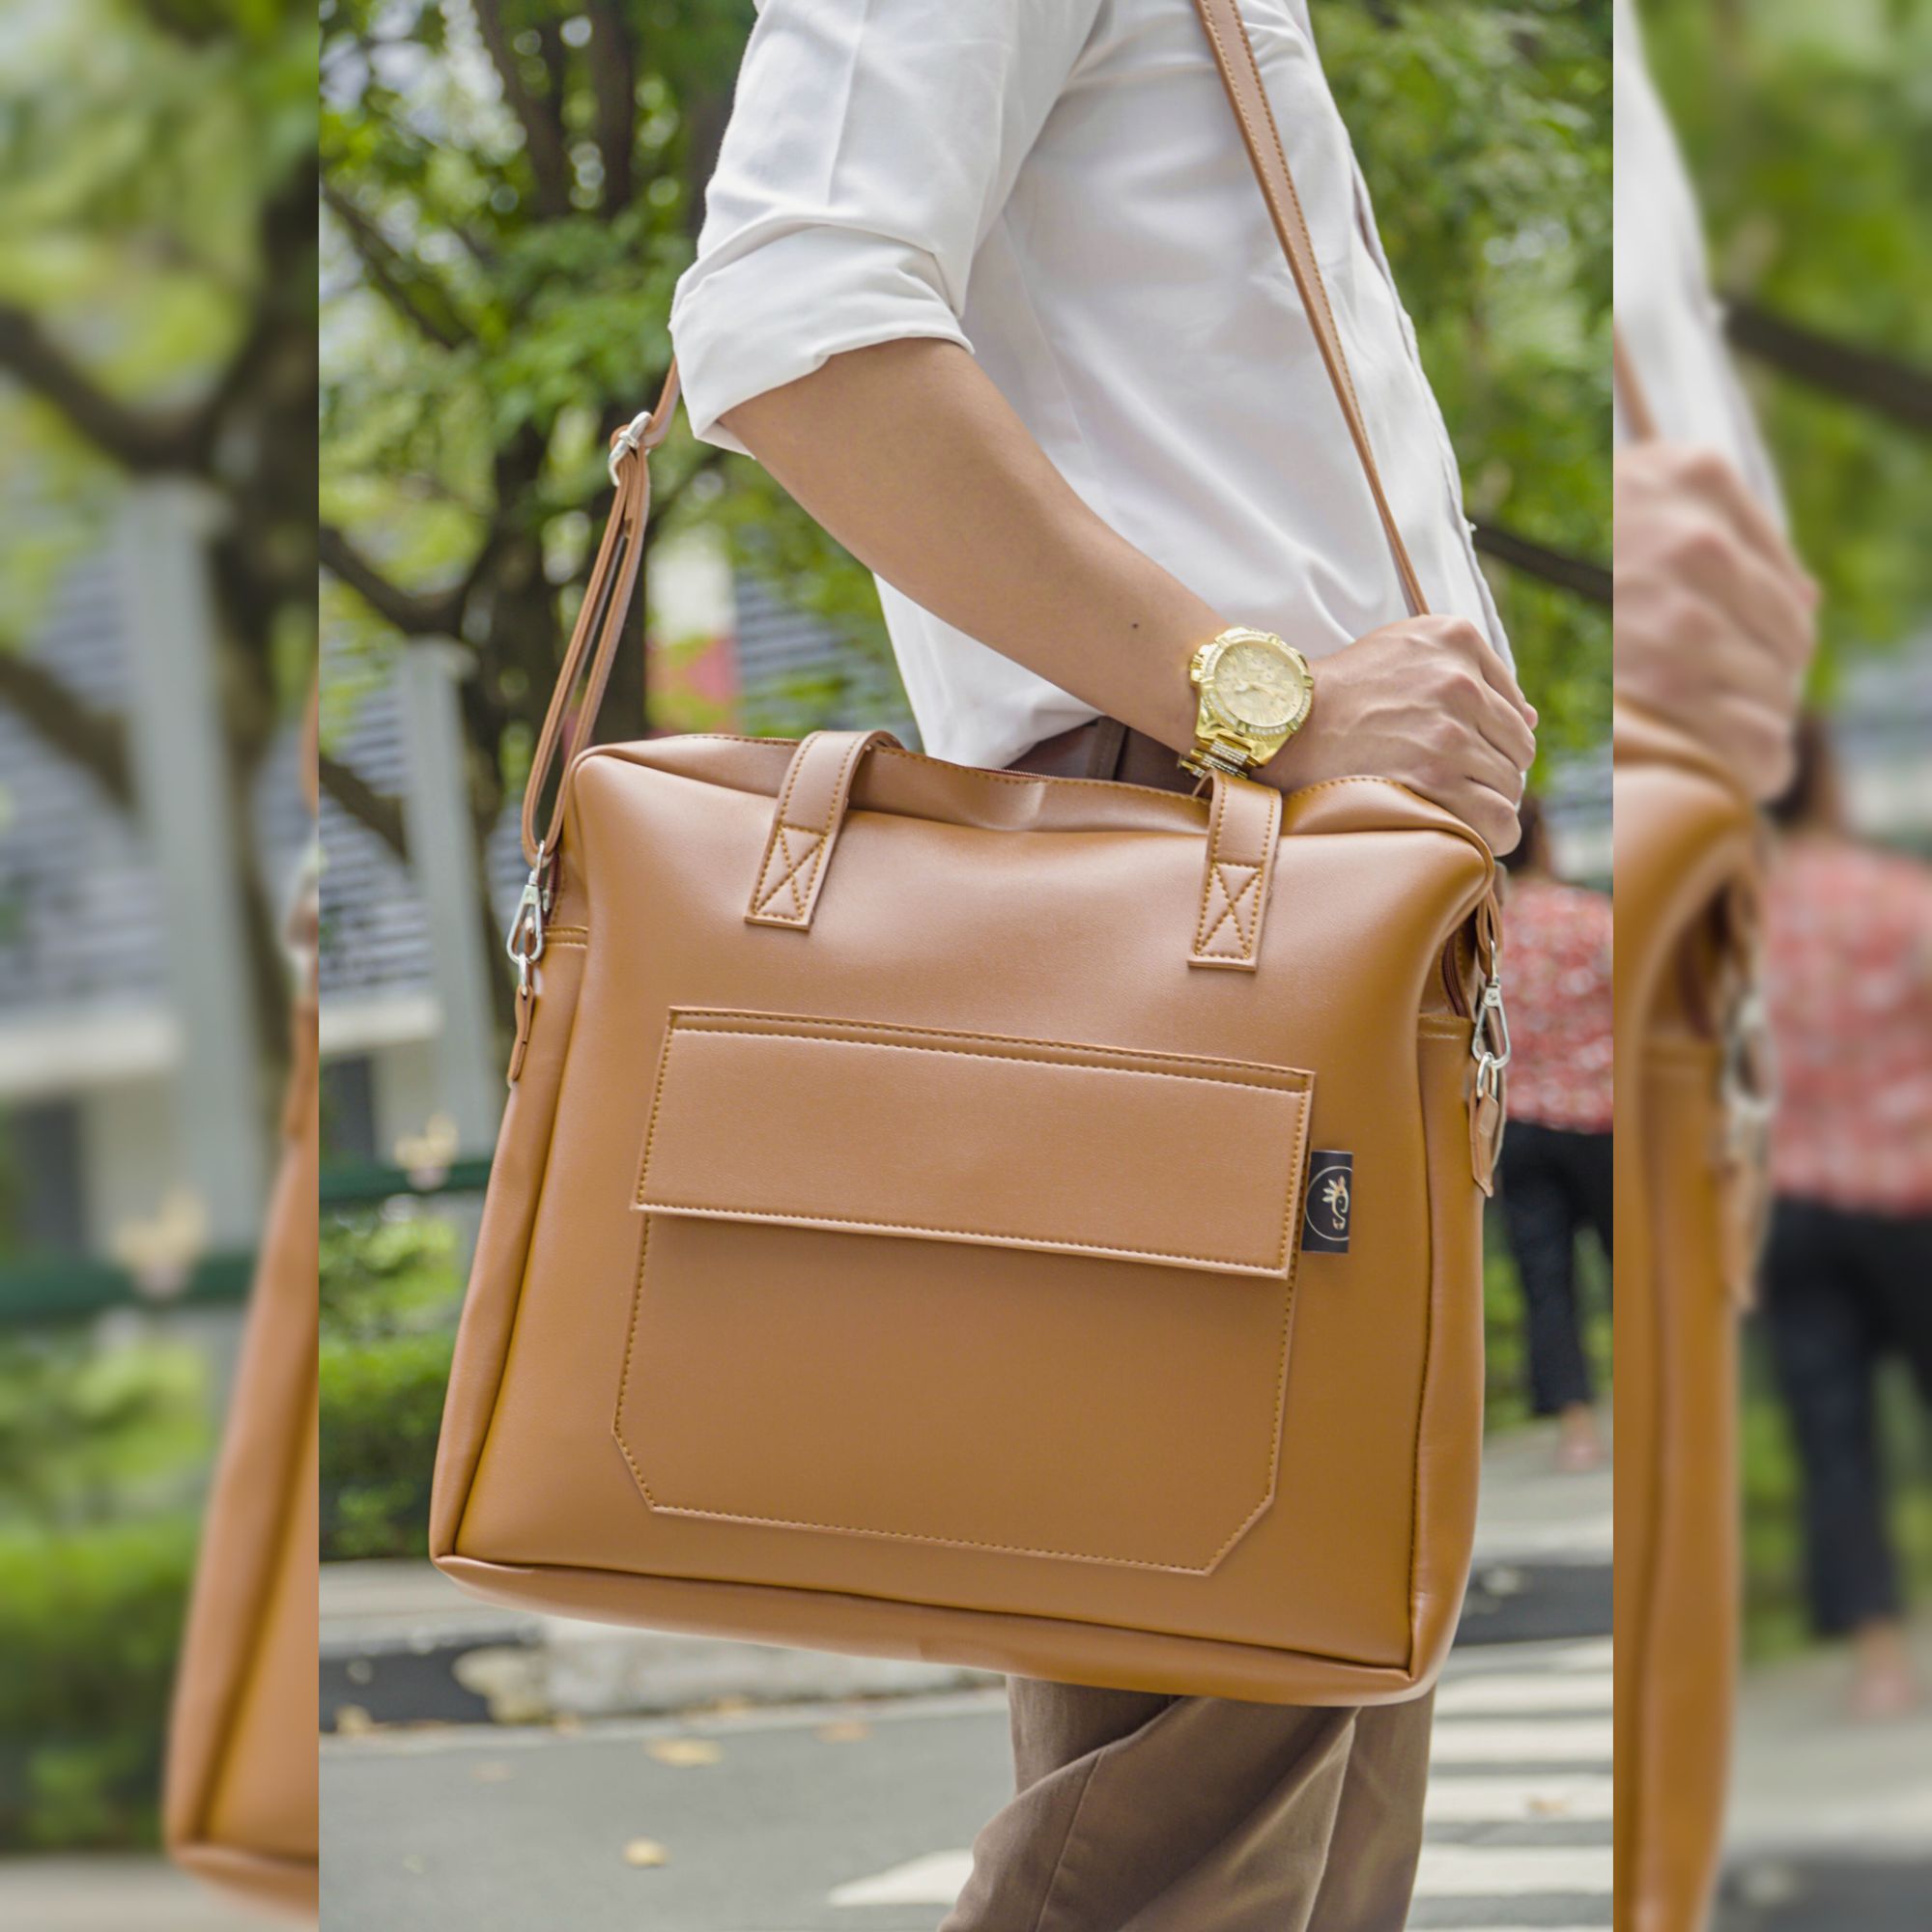 Handbags, Bags, and Briefcases Appropriate for Meetings